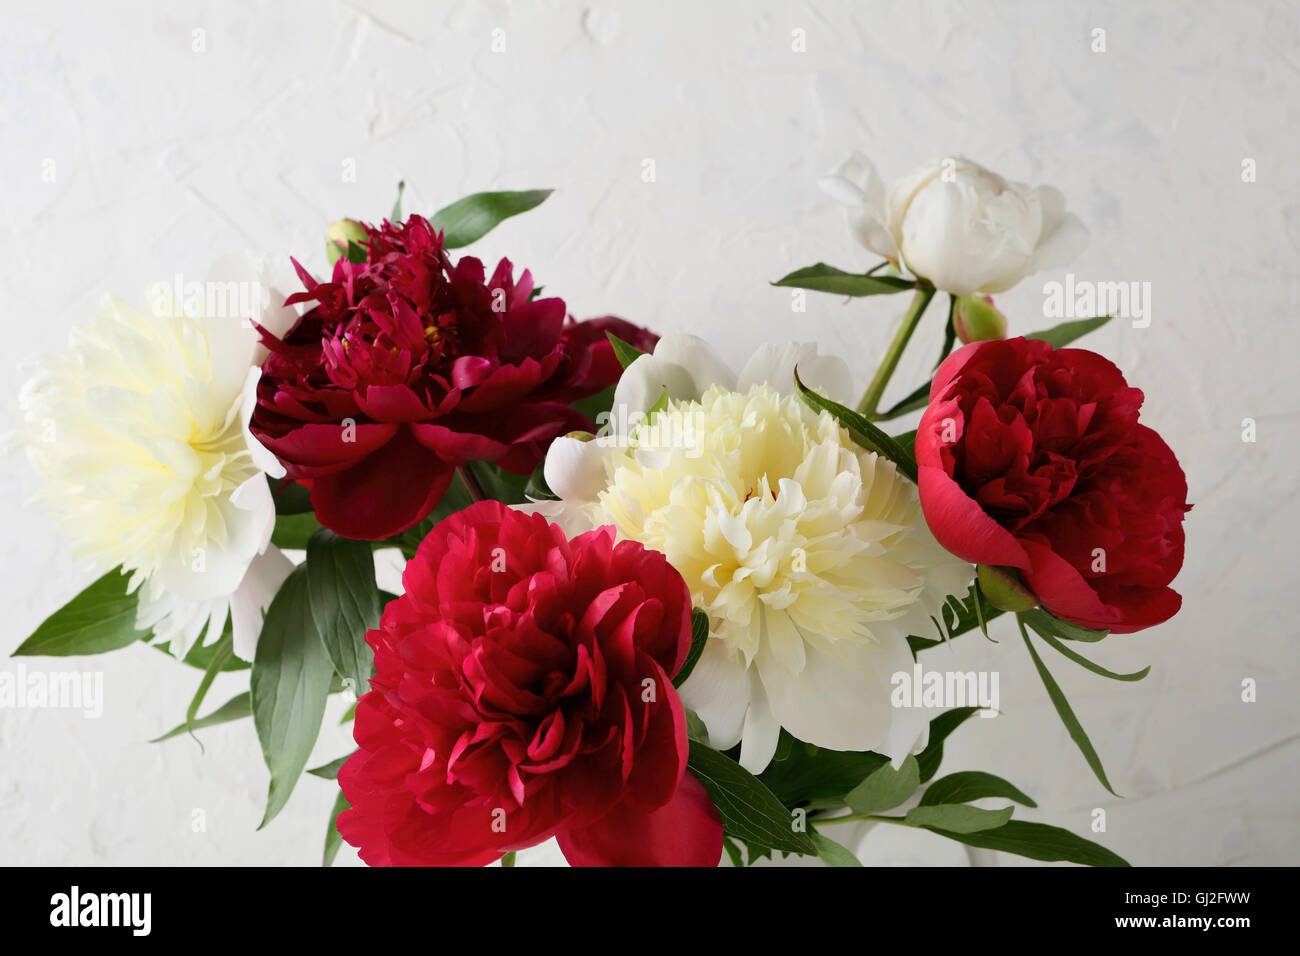 Red and white peonies on background, flowers closeup Stock Photo